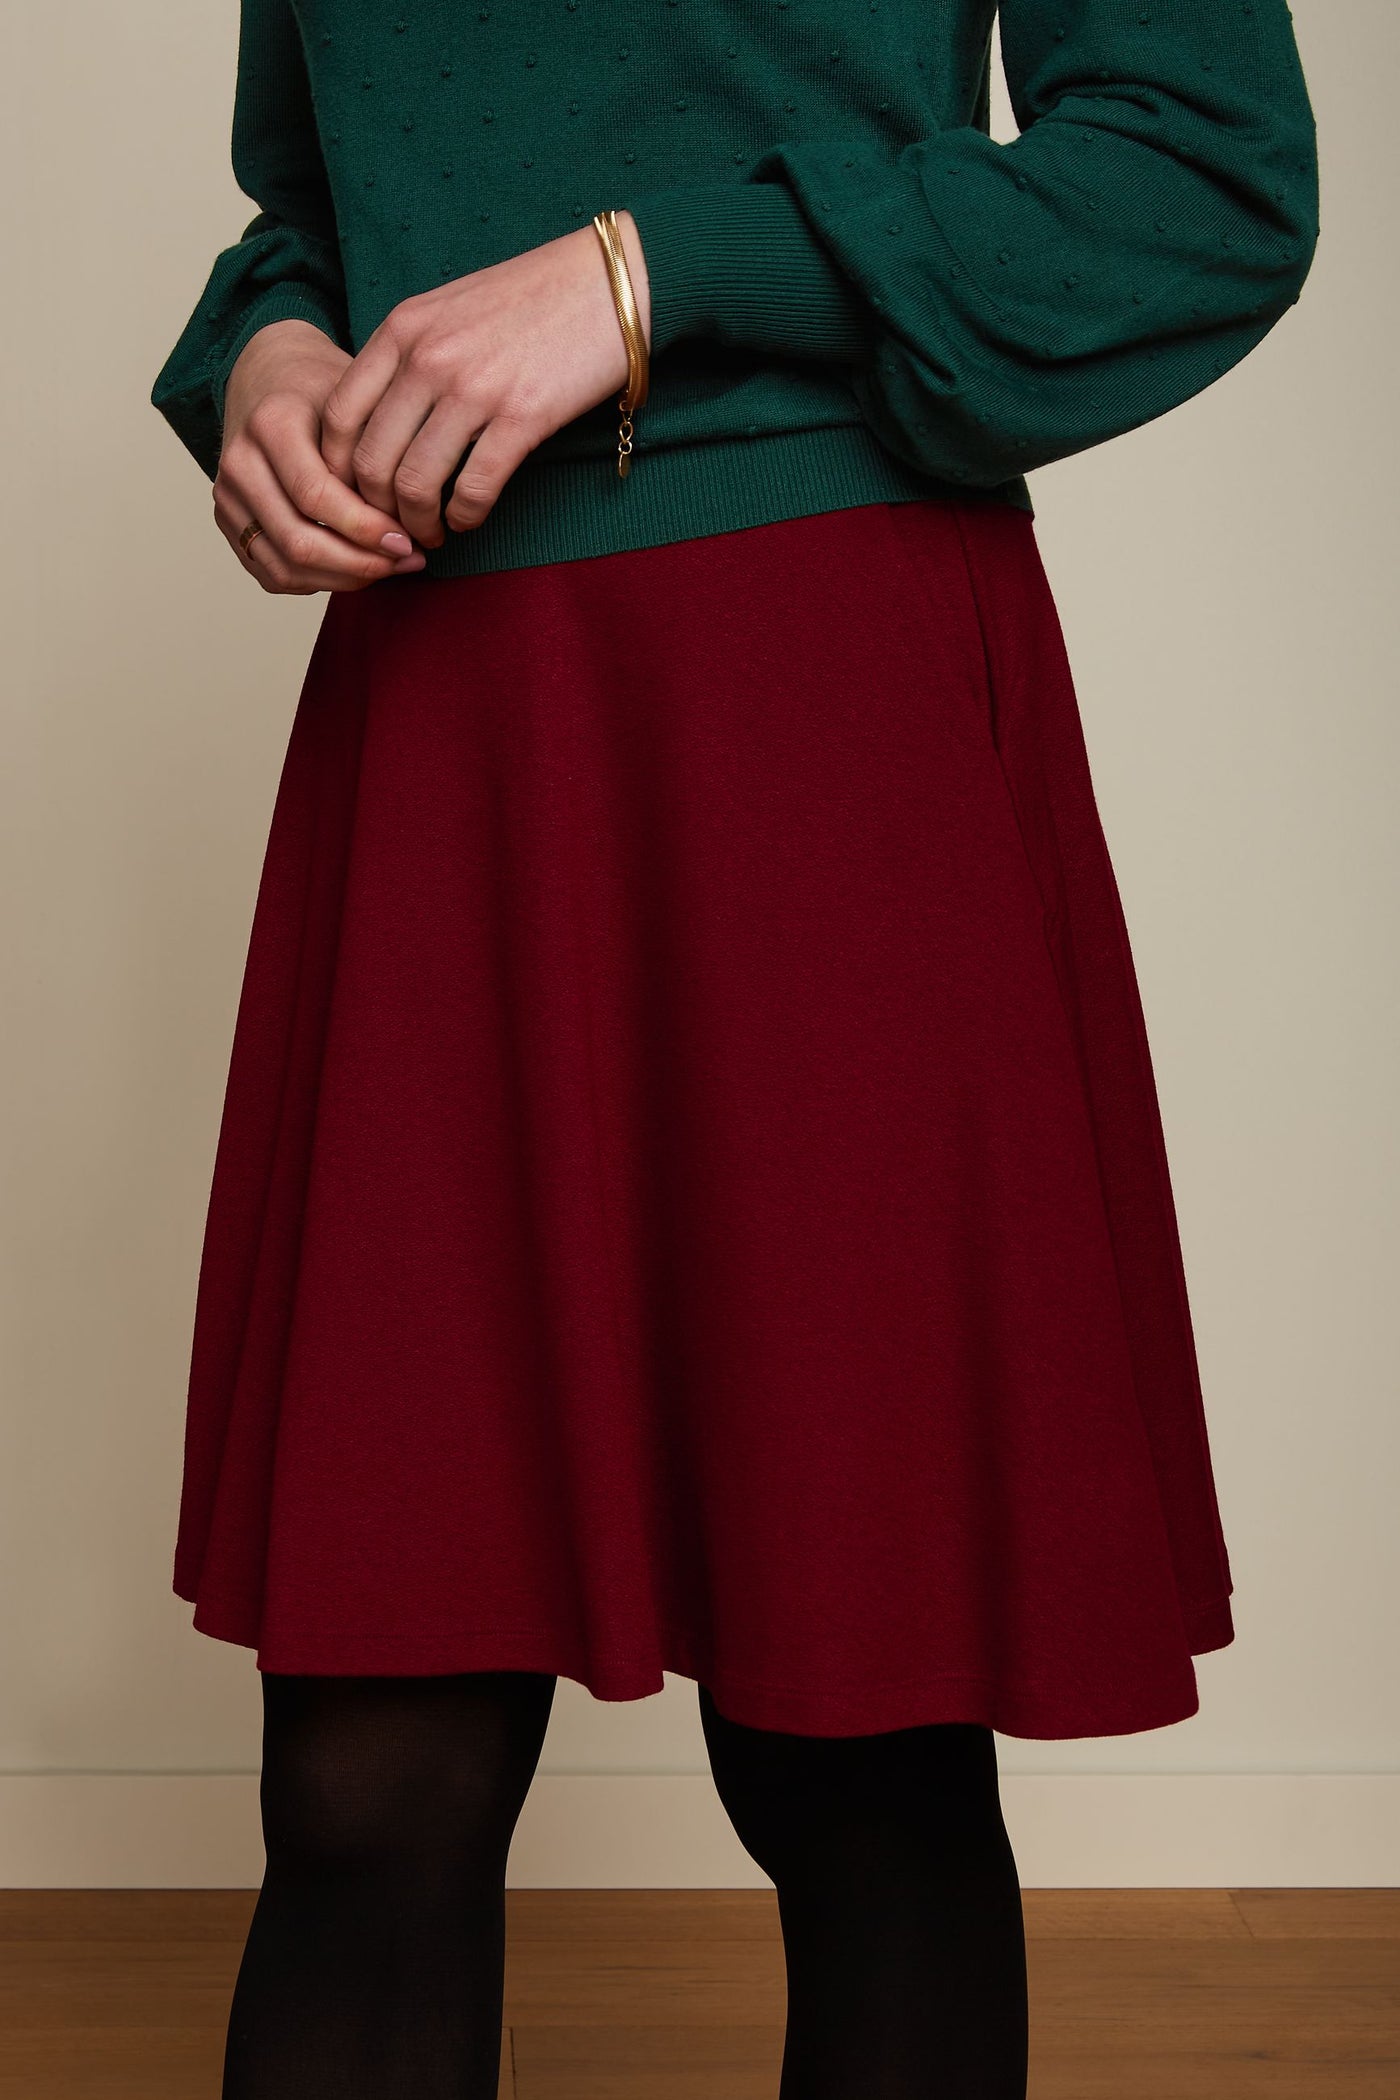 King Louie Serena Skirt Milano Crepe #farve_cabernet-red